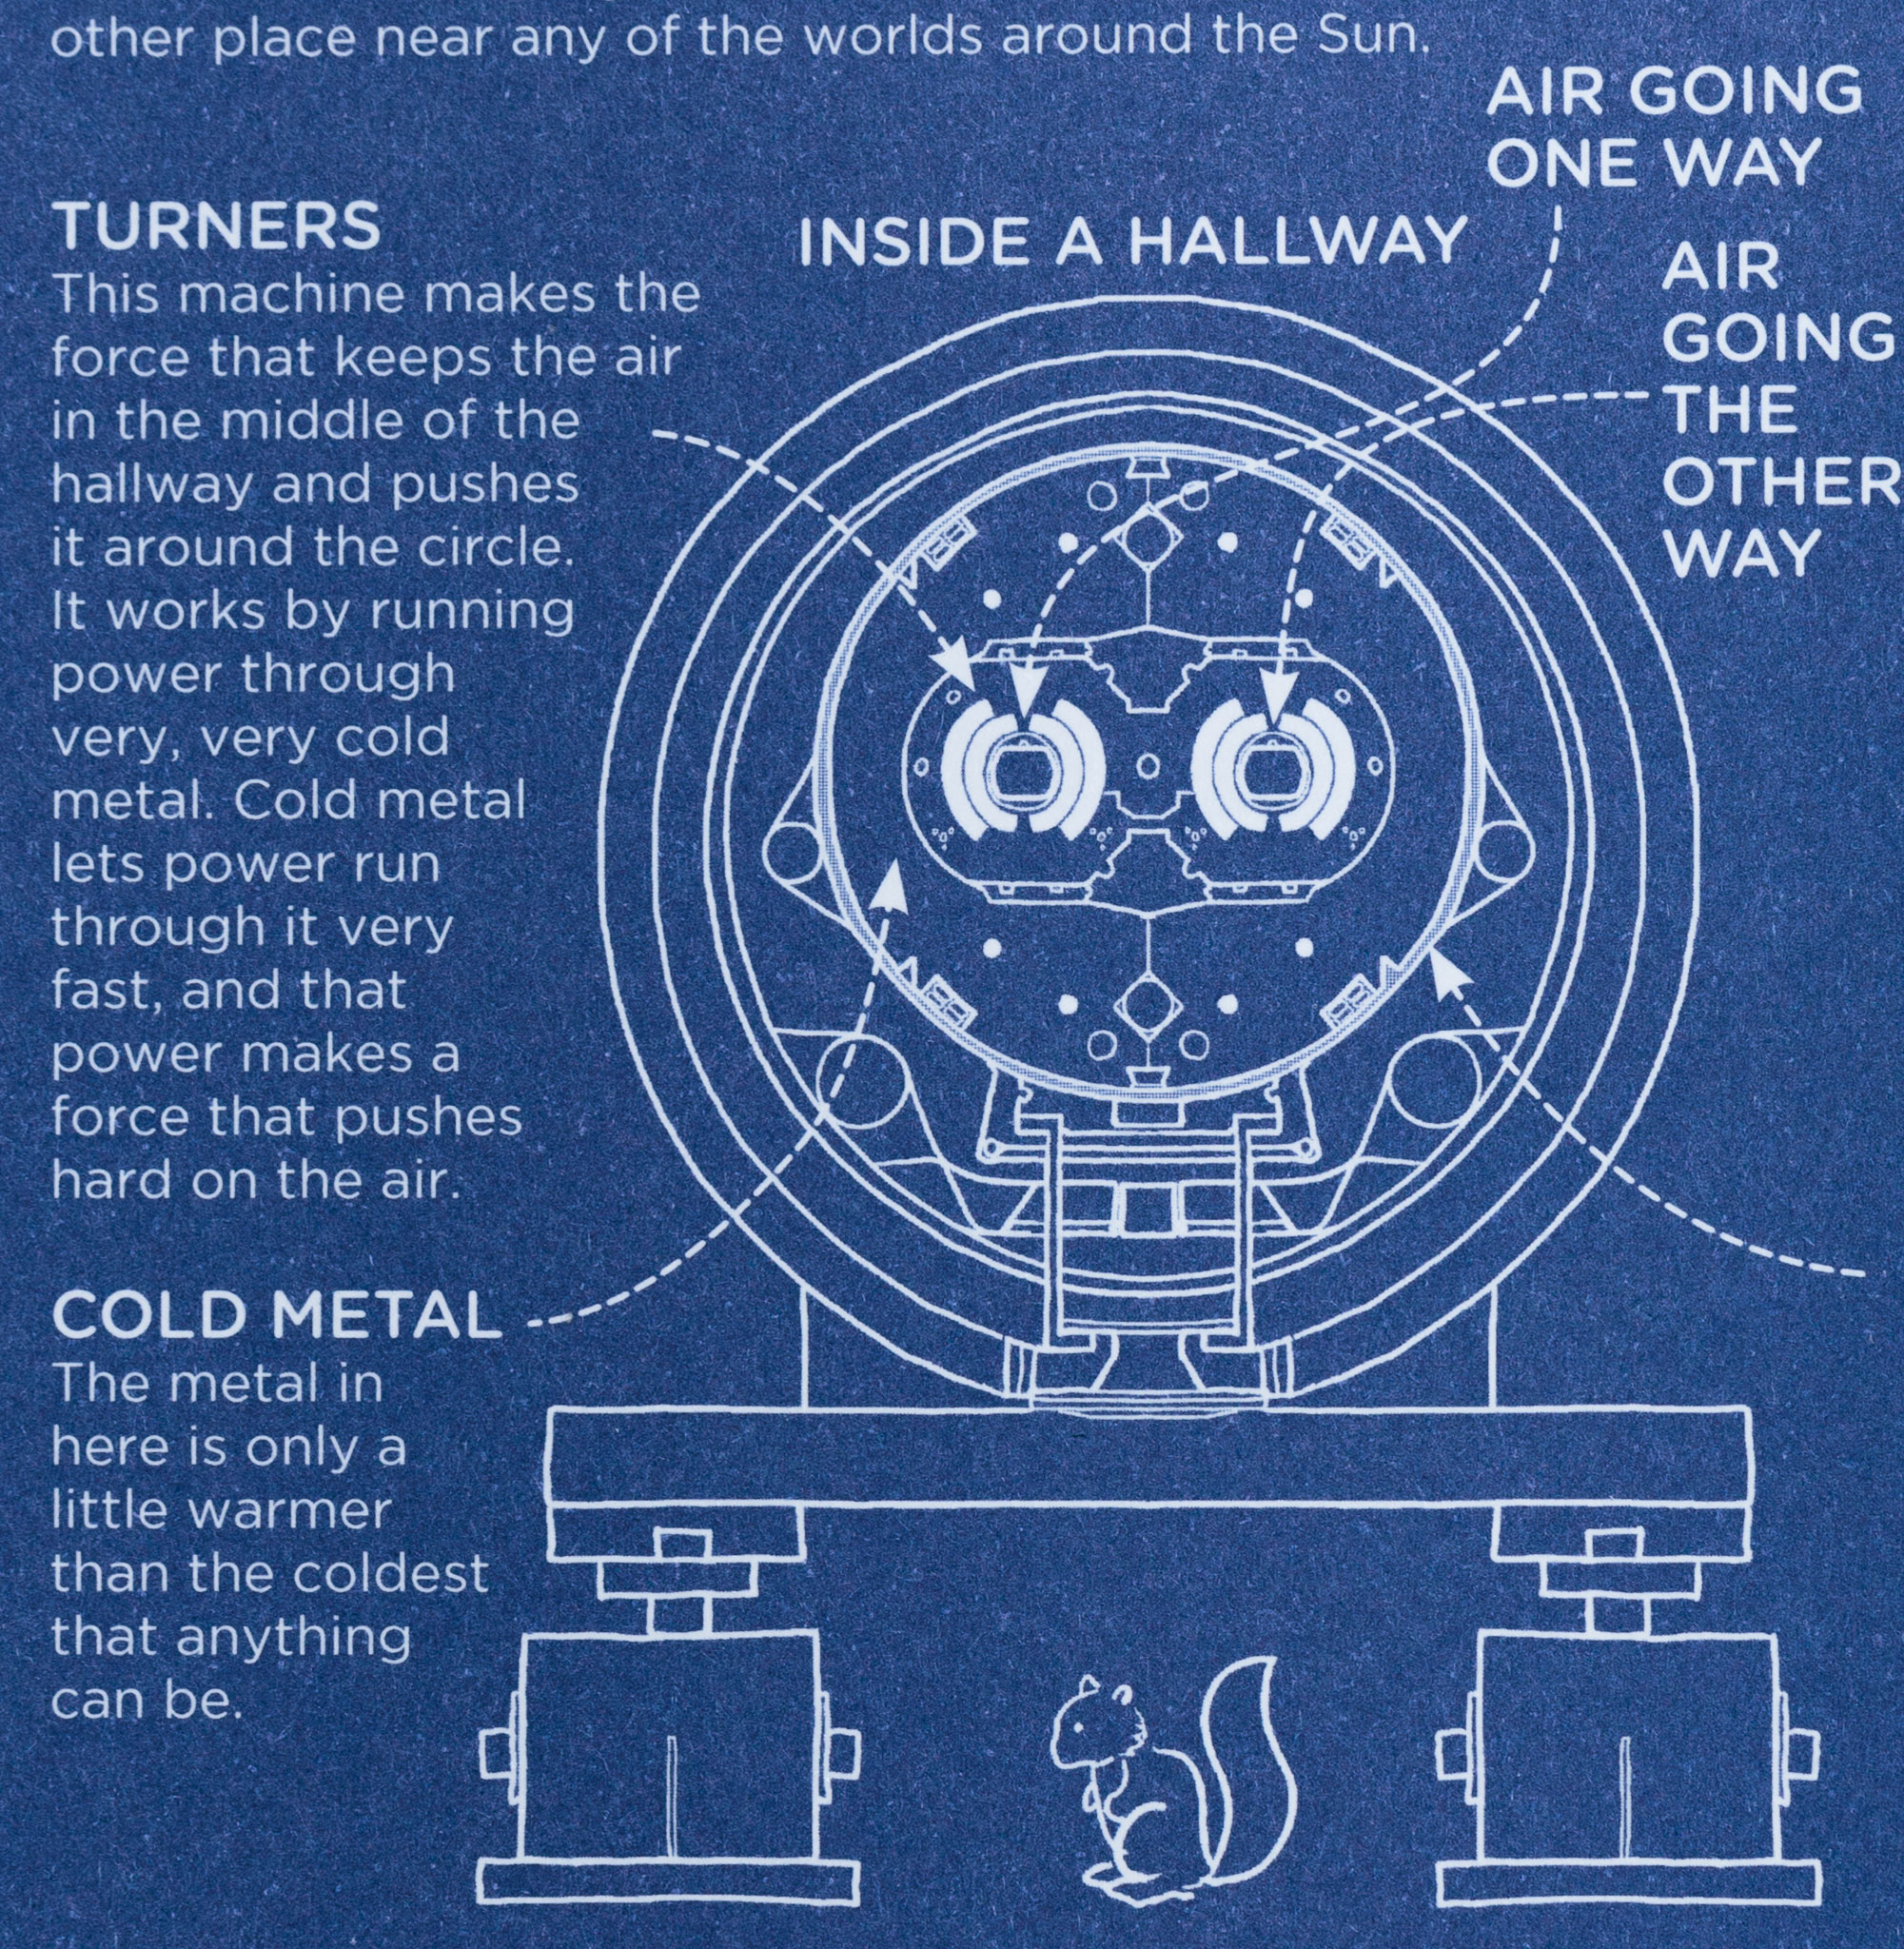 Randall Munroe calls the Large Hadron Collider, a particle accelerator that smashes protons into each other, a​ 